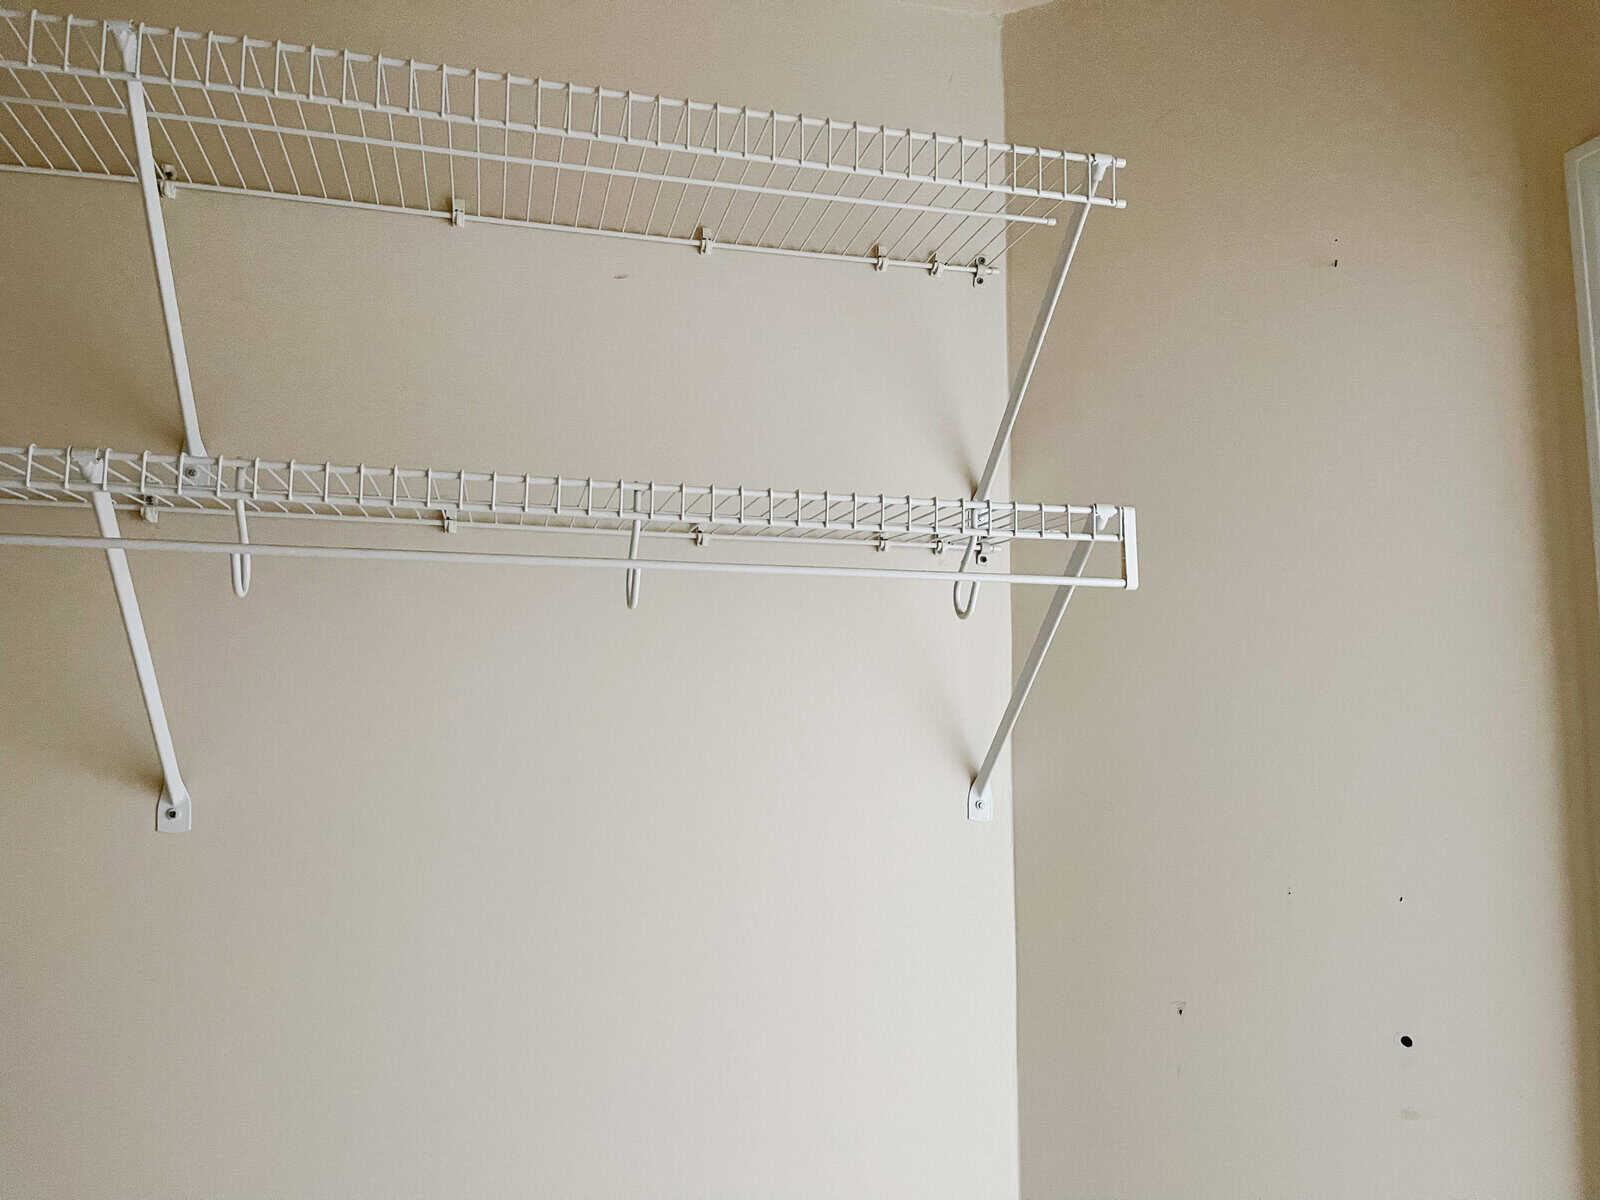 white wire closet shelves against a cream colored wall